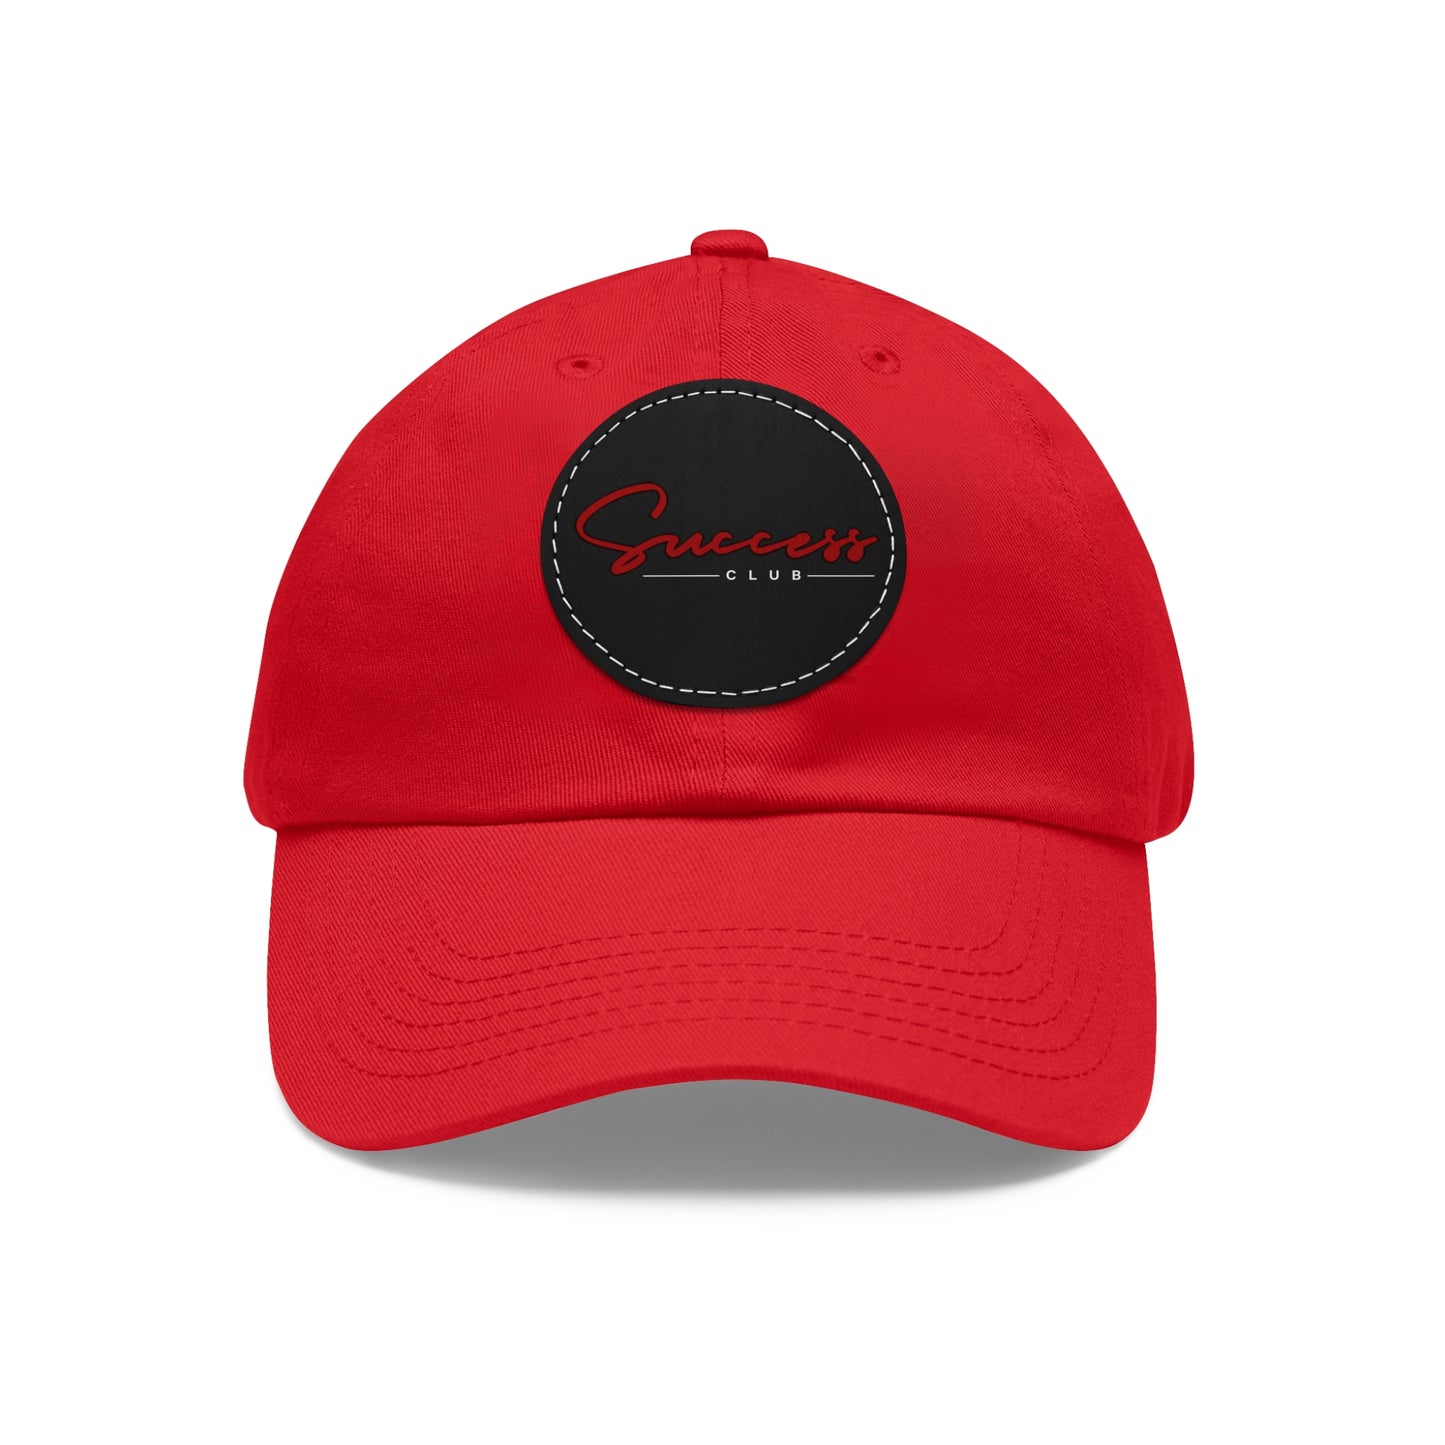 Success Club Hat with Leather Patch (Round)